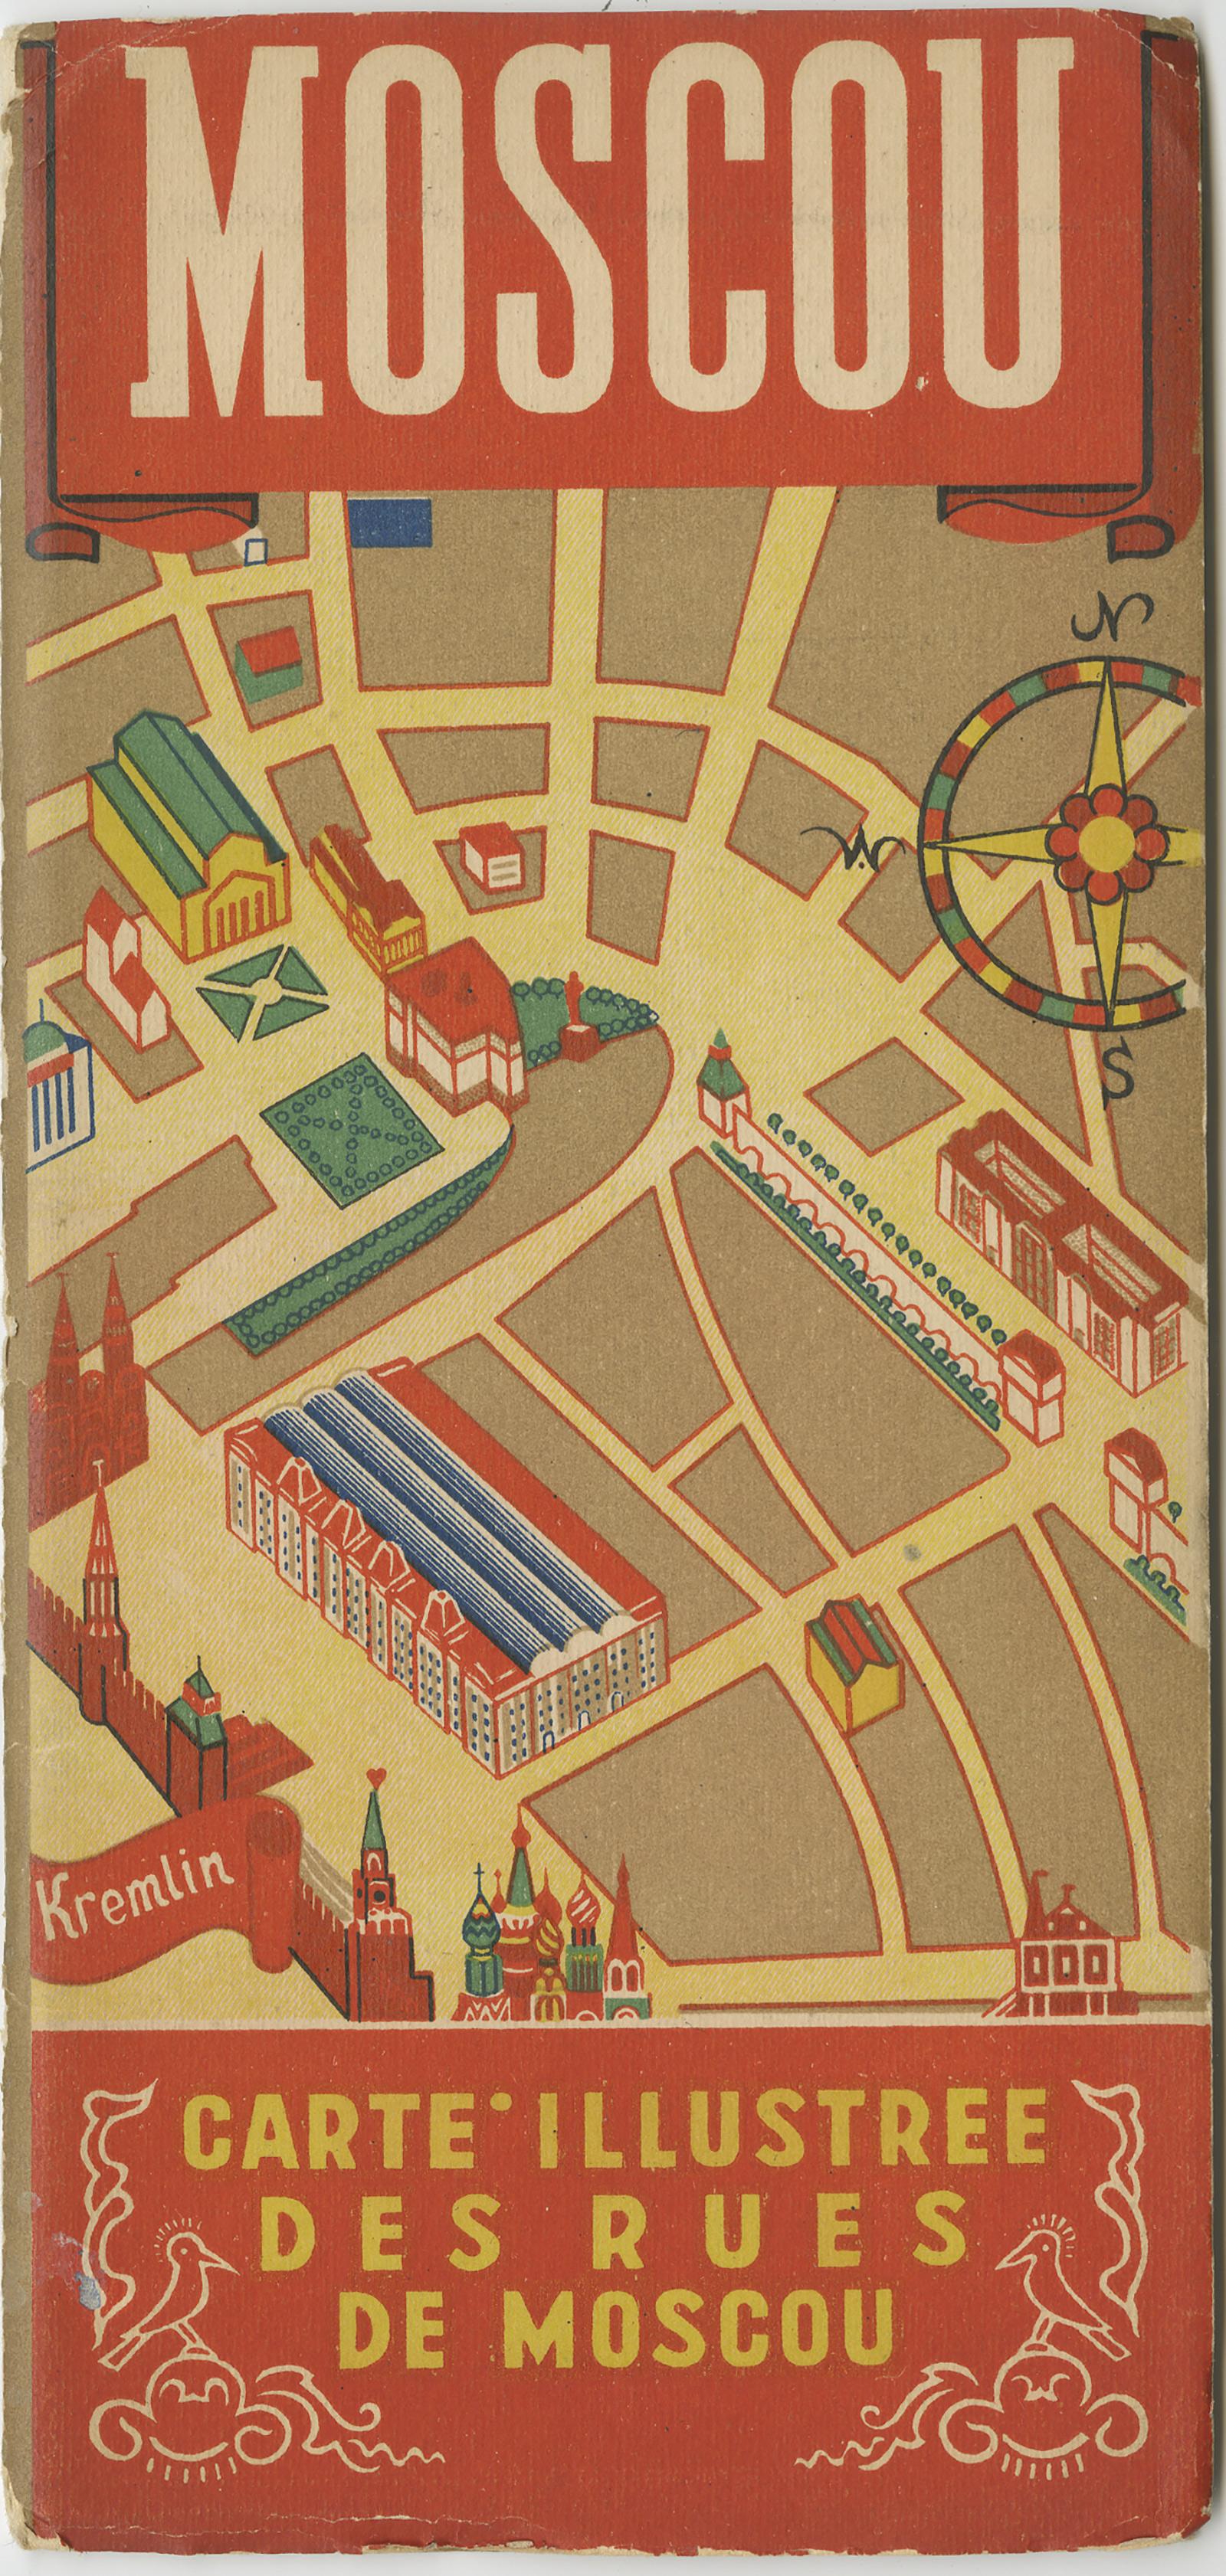 Antique map titled 'Carte Illustree des Rues de Moscou'. Vintage folding map of the streets of Moscow, Russia. Published by Intourist.